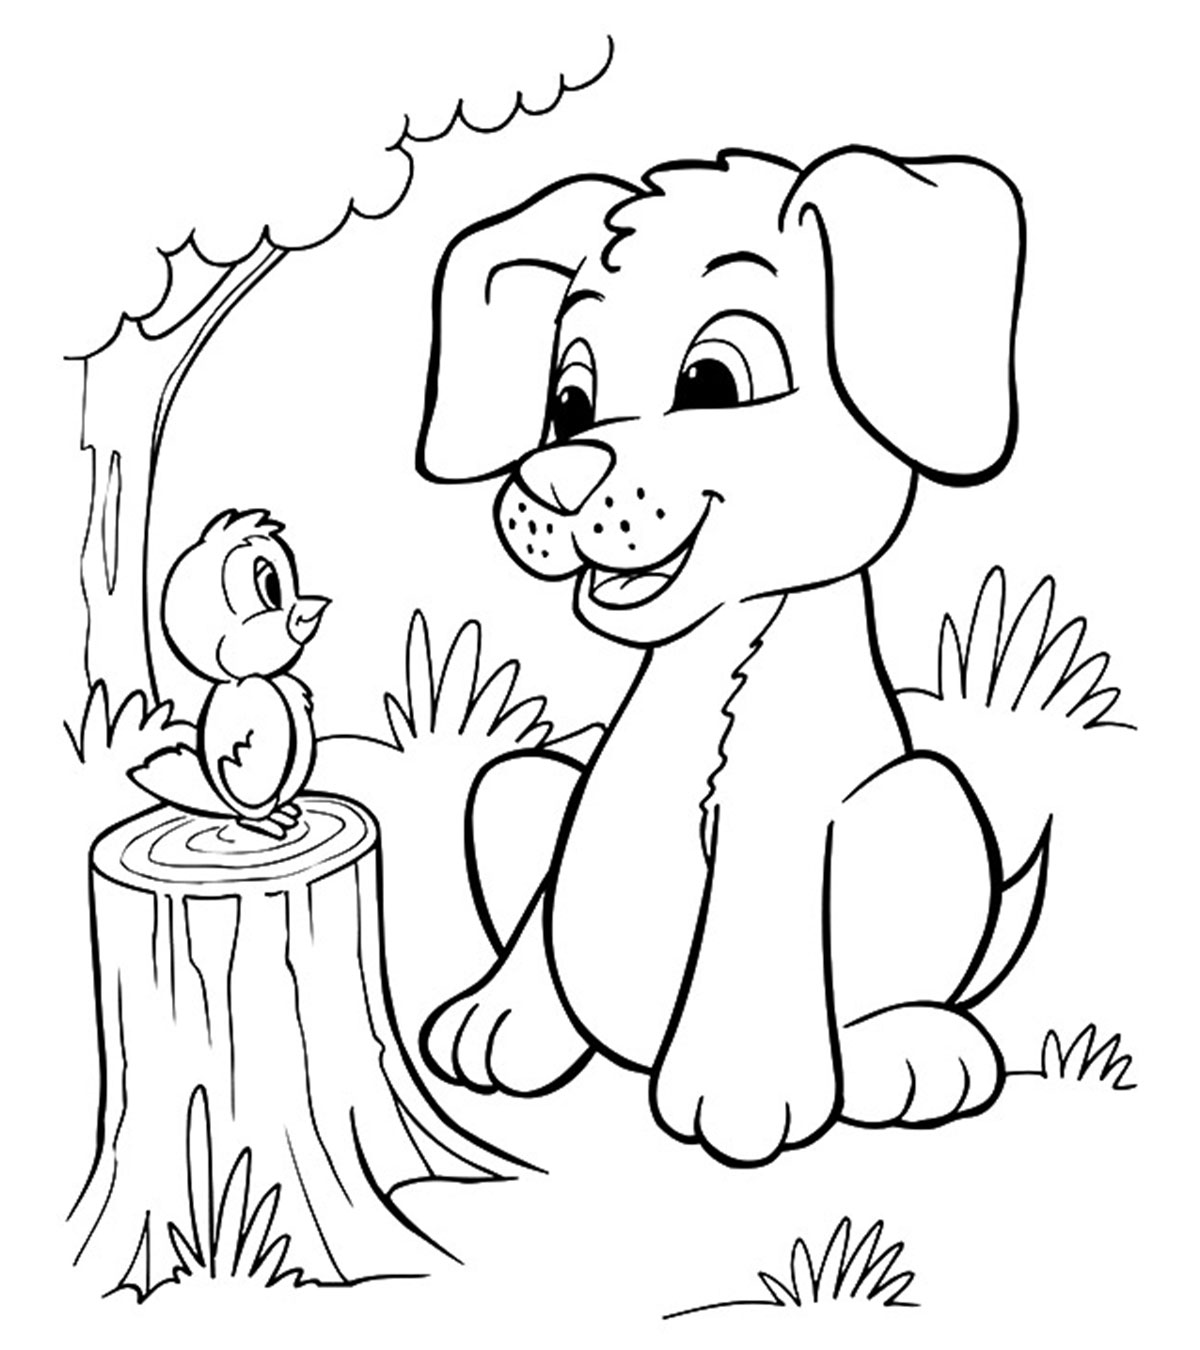 easy-dog-coloring-pages-free-coloring-pages-to-download-and-print